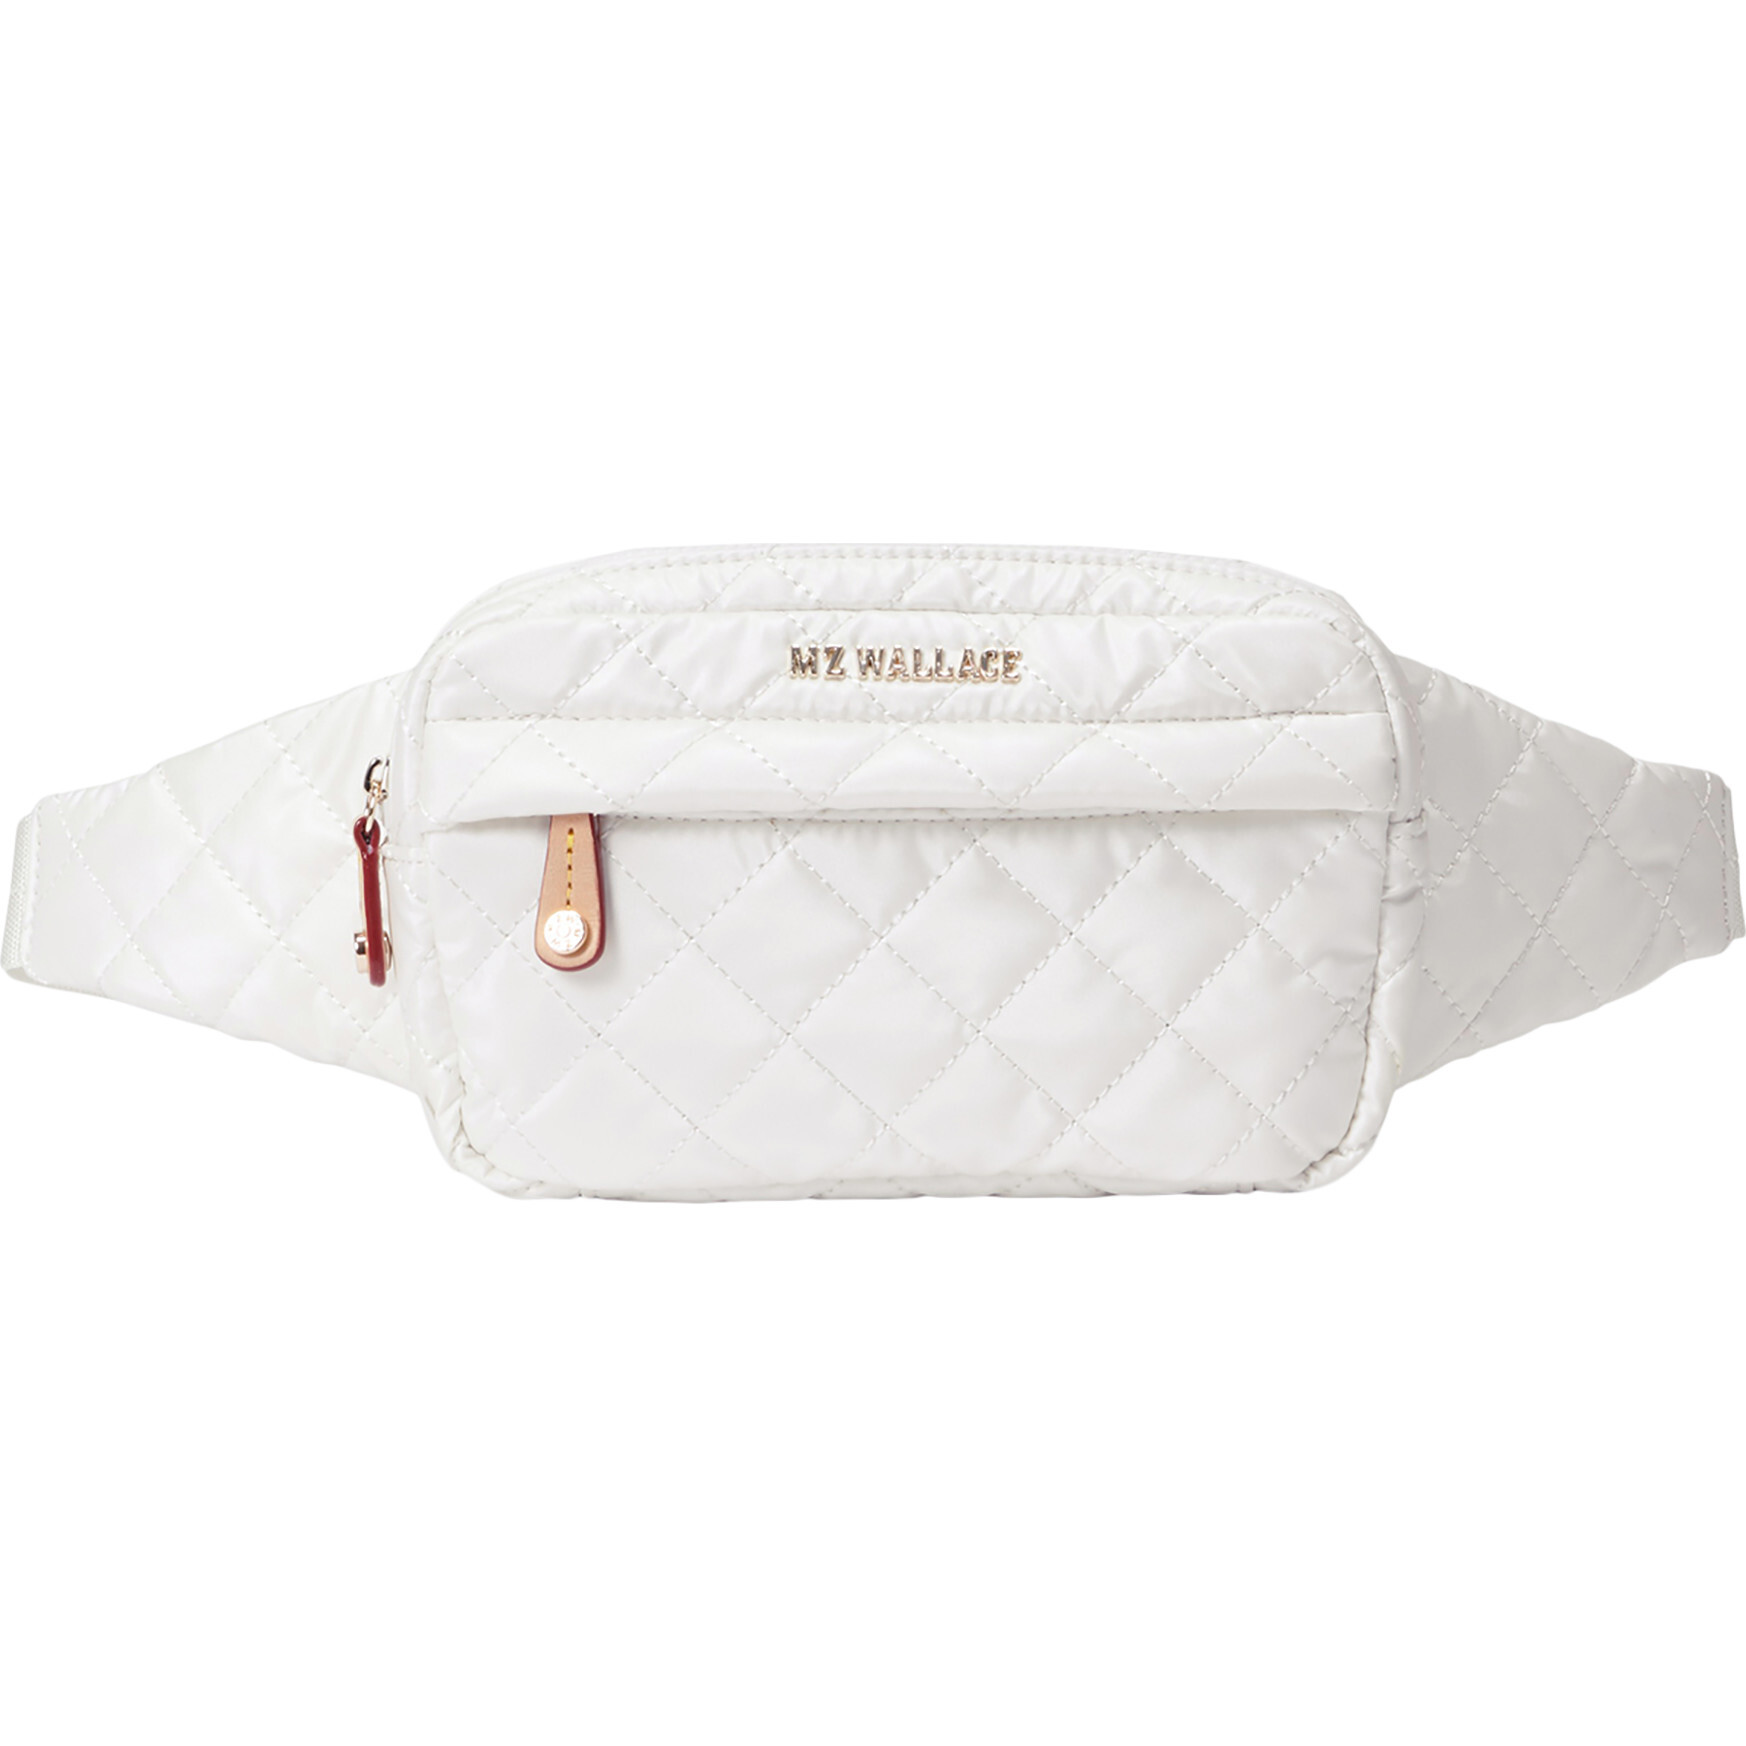 New MZ WALLACE Pearl White Belt Bag w/Supergoop Snow Day SPF Kit LIMITED  EDITION